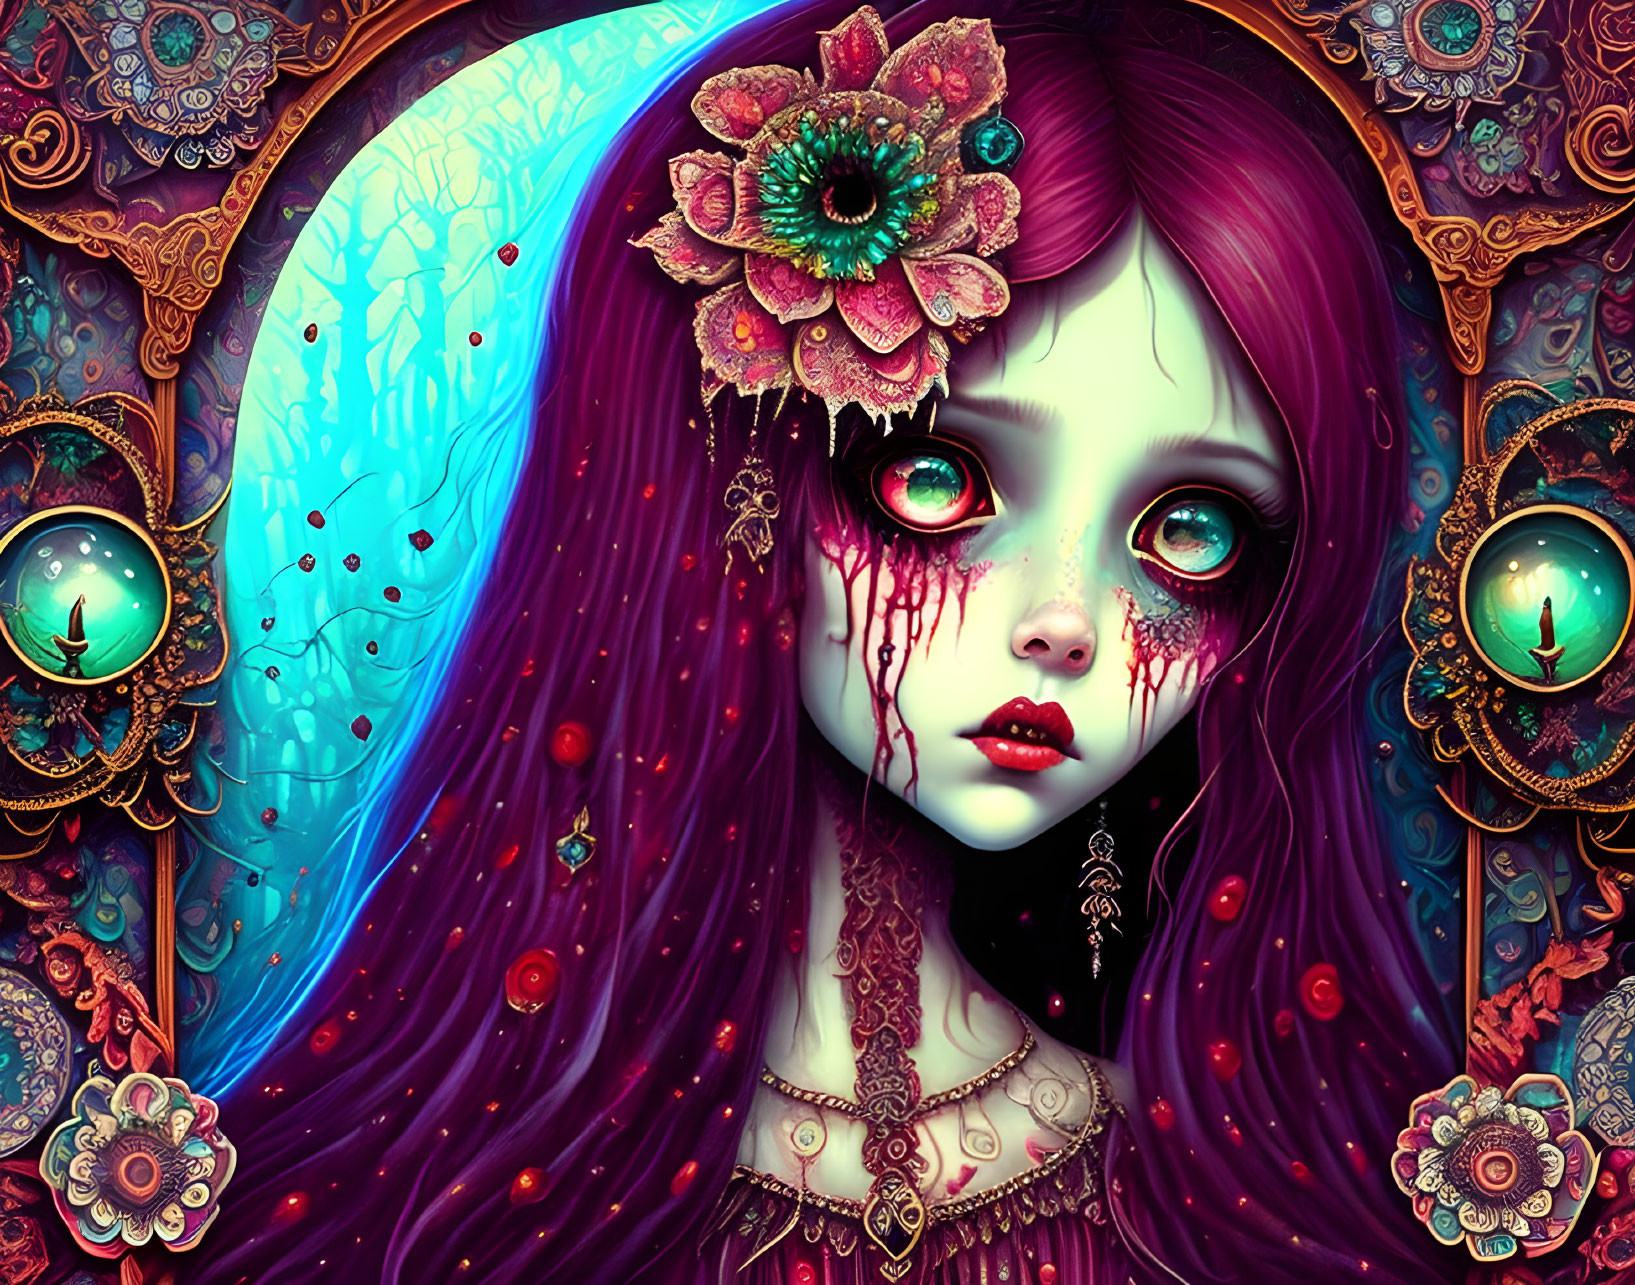 Colorful illustration of a girl with red eyes and purple hair surrounded by ornate details